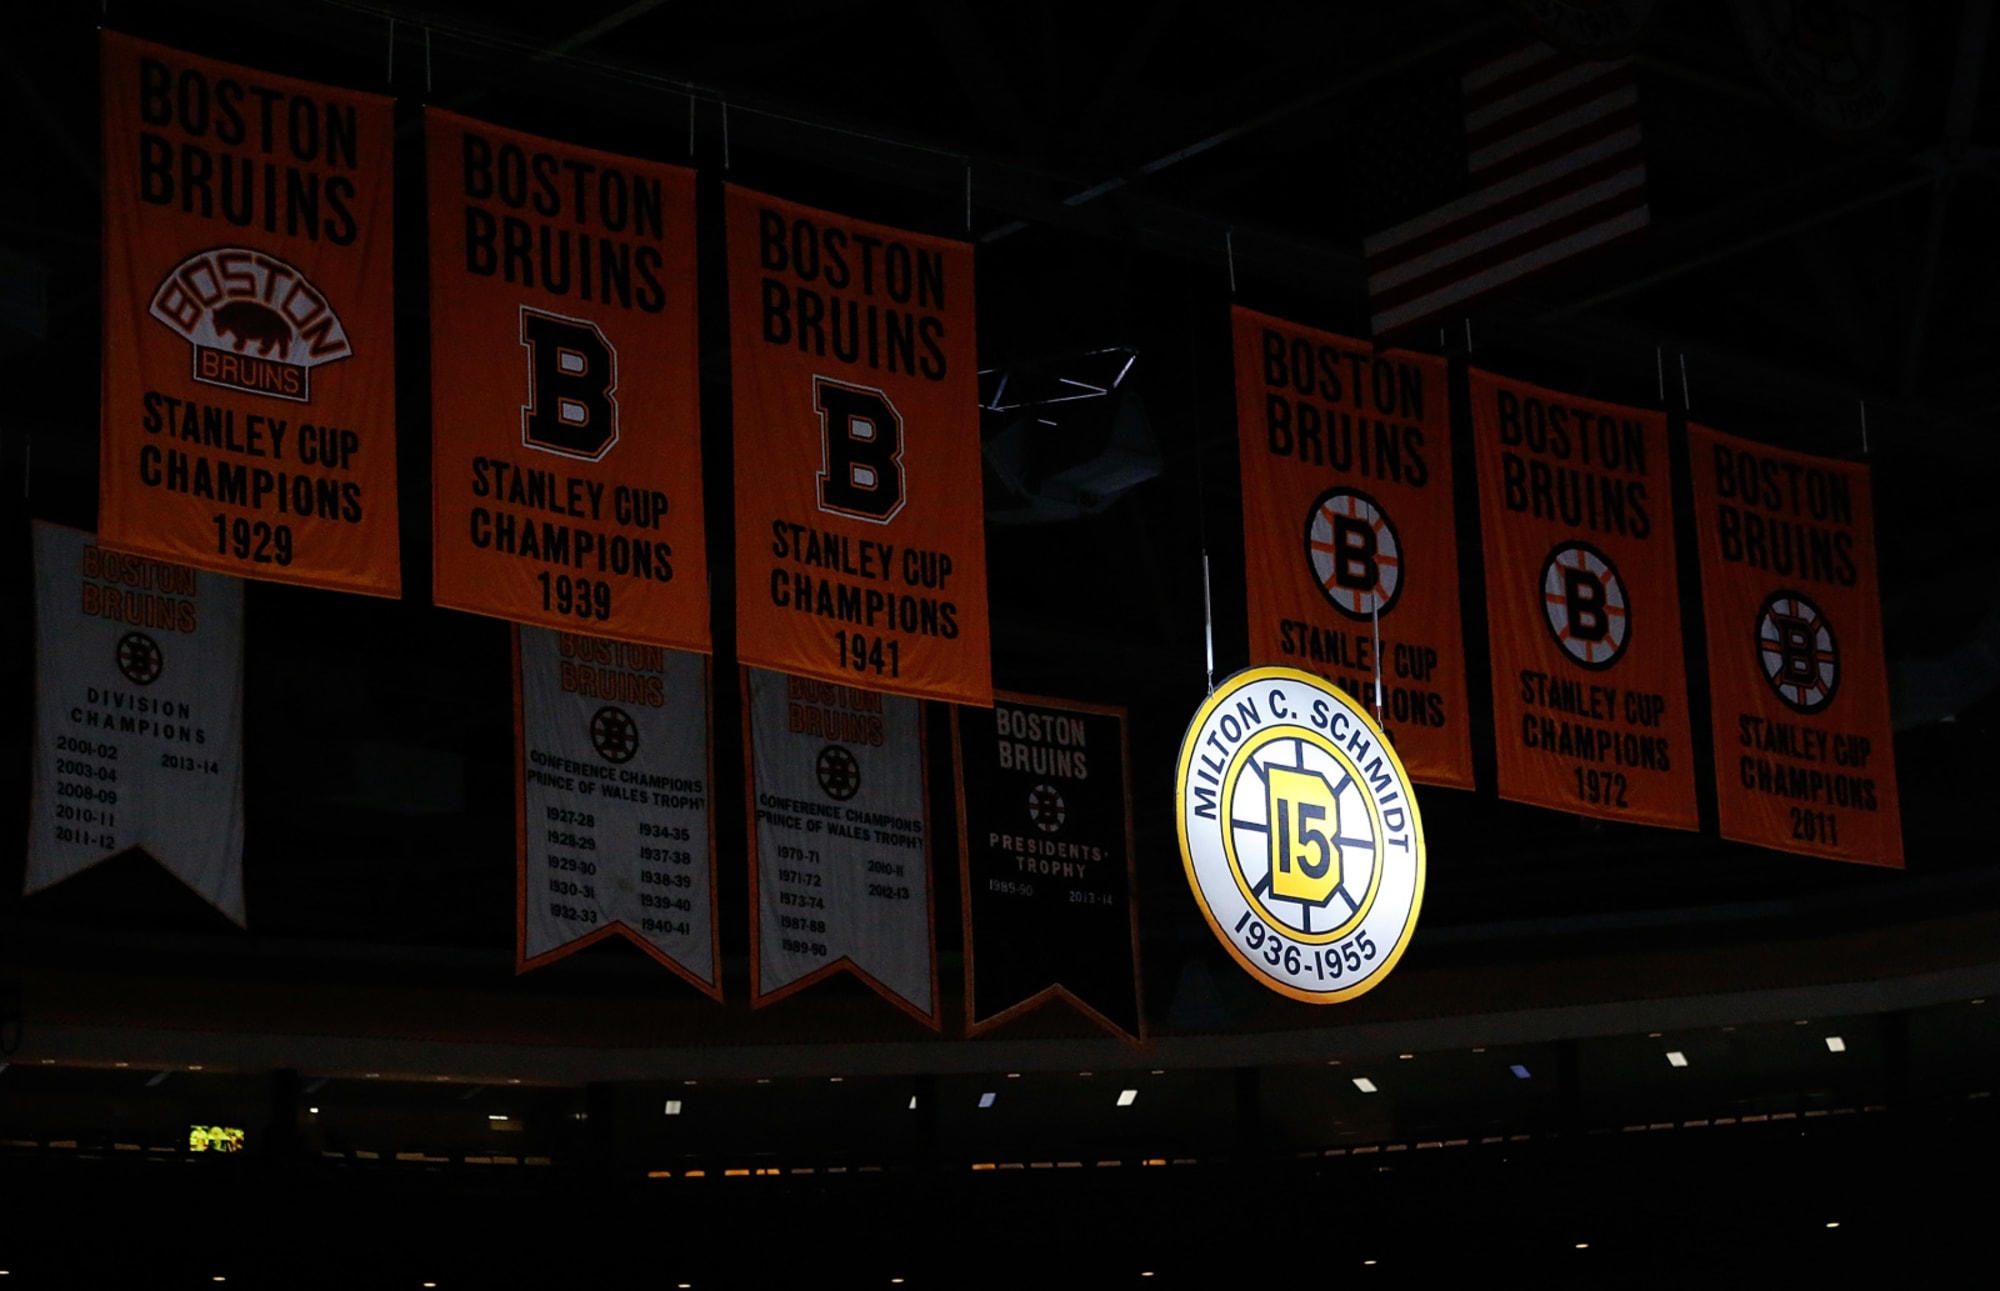 Bruins raise banner to rafters to celebrate 2011 Stanley Cup